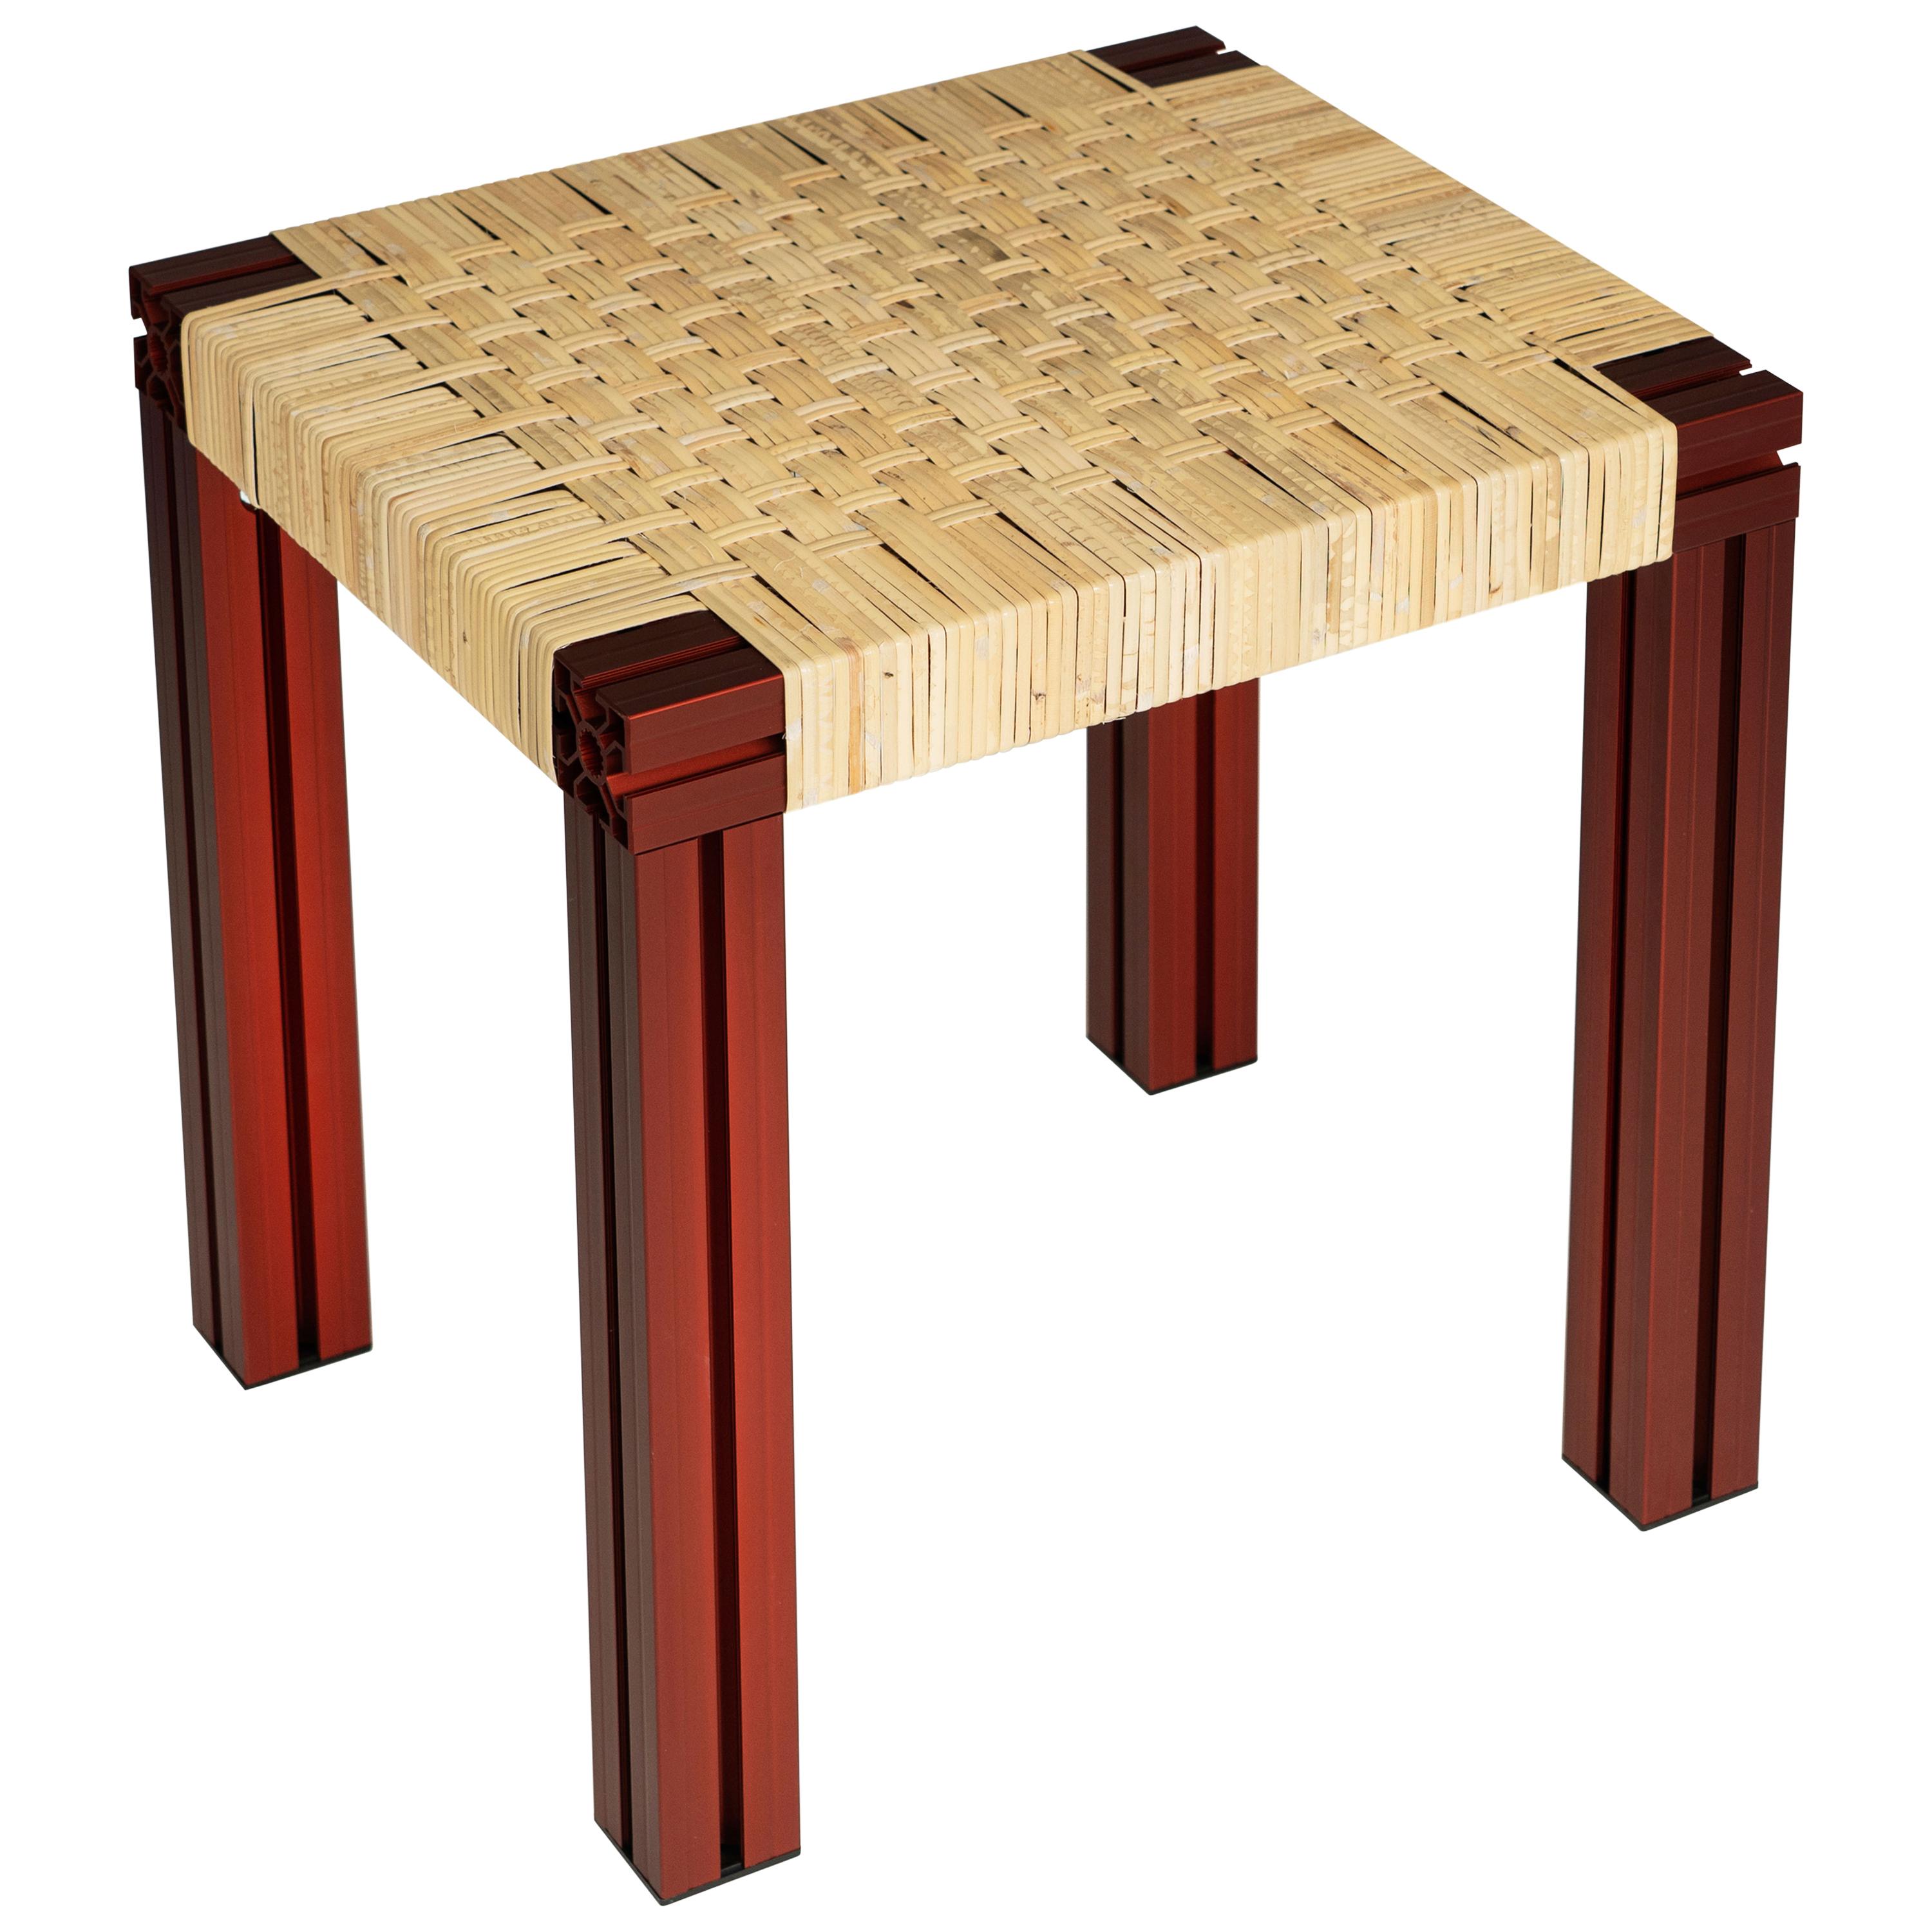 Red Aluminium Stool with Lapping Cane Seating from Anodised Wicker Collection